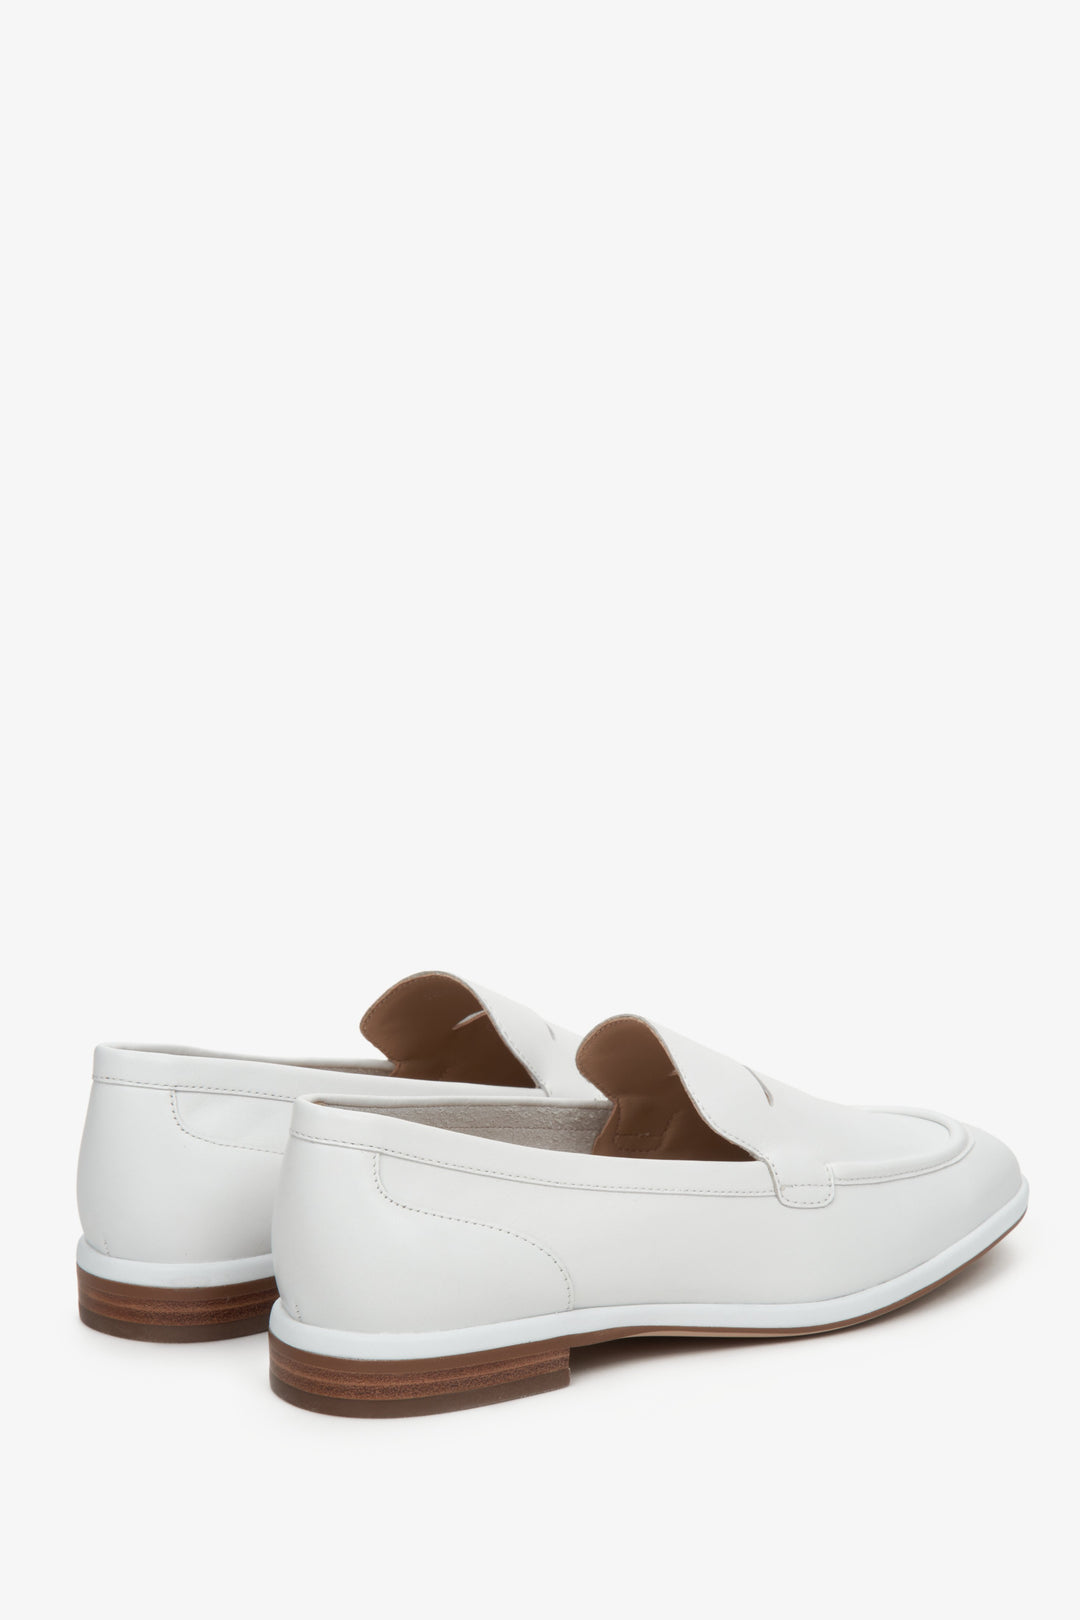 White, leather women's moccasins by Estro - close-up on the side vamp and heel.